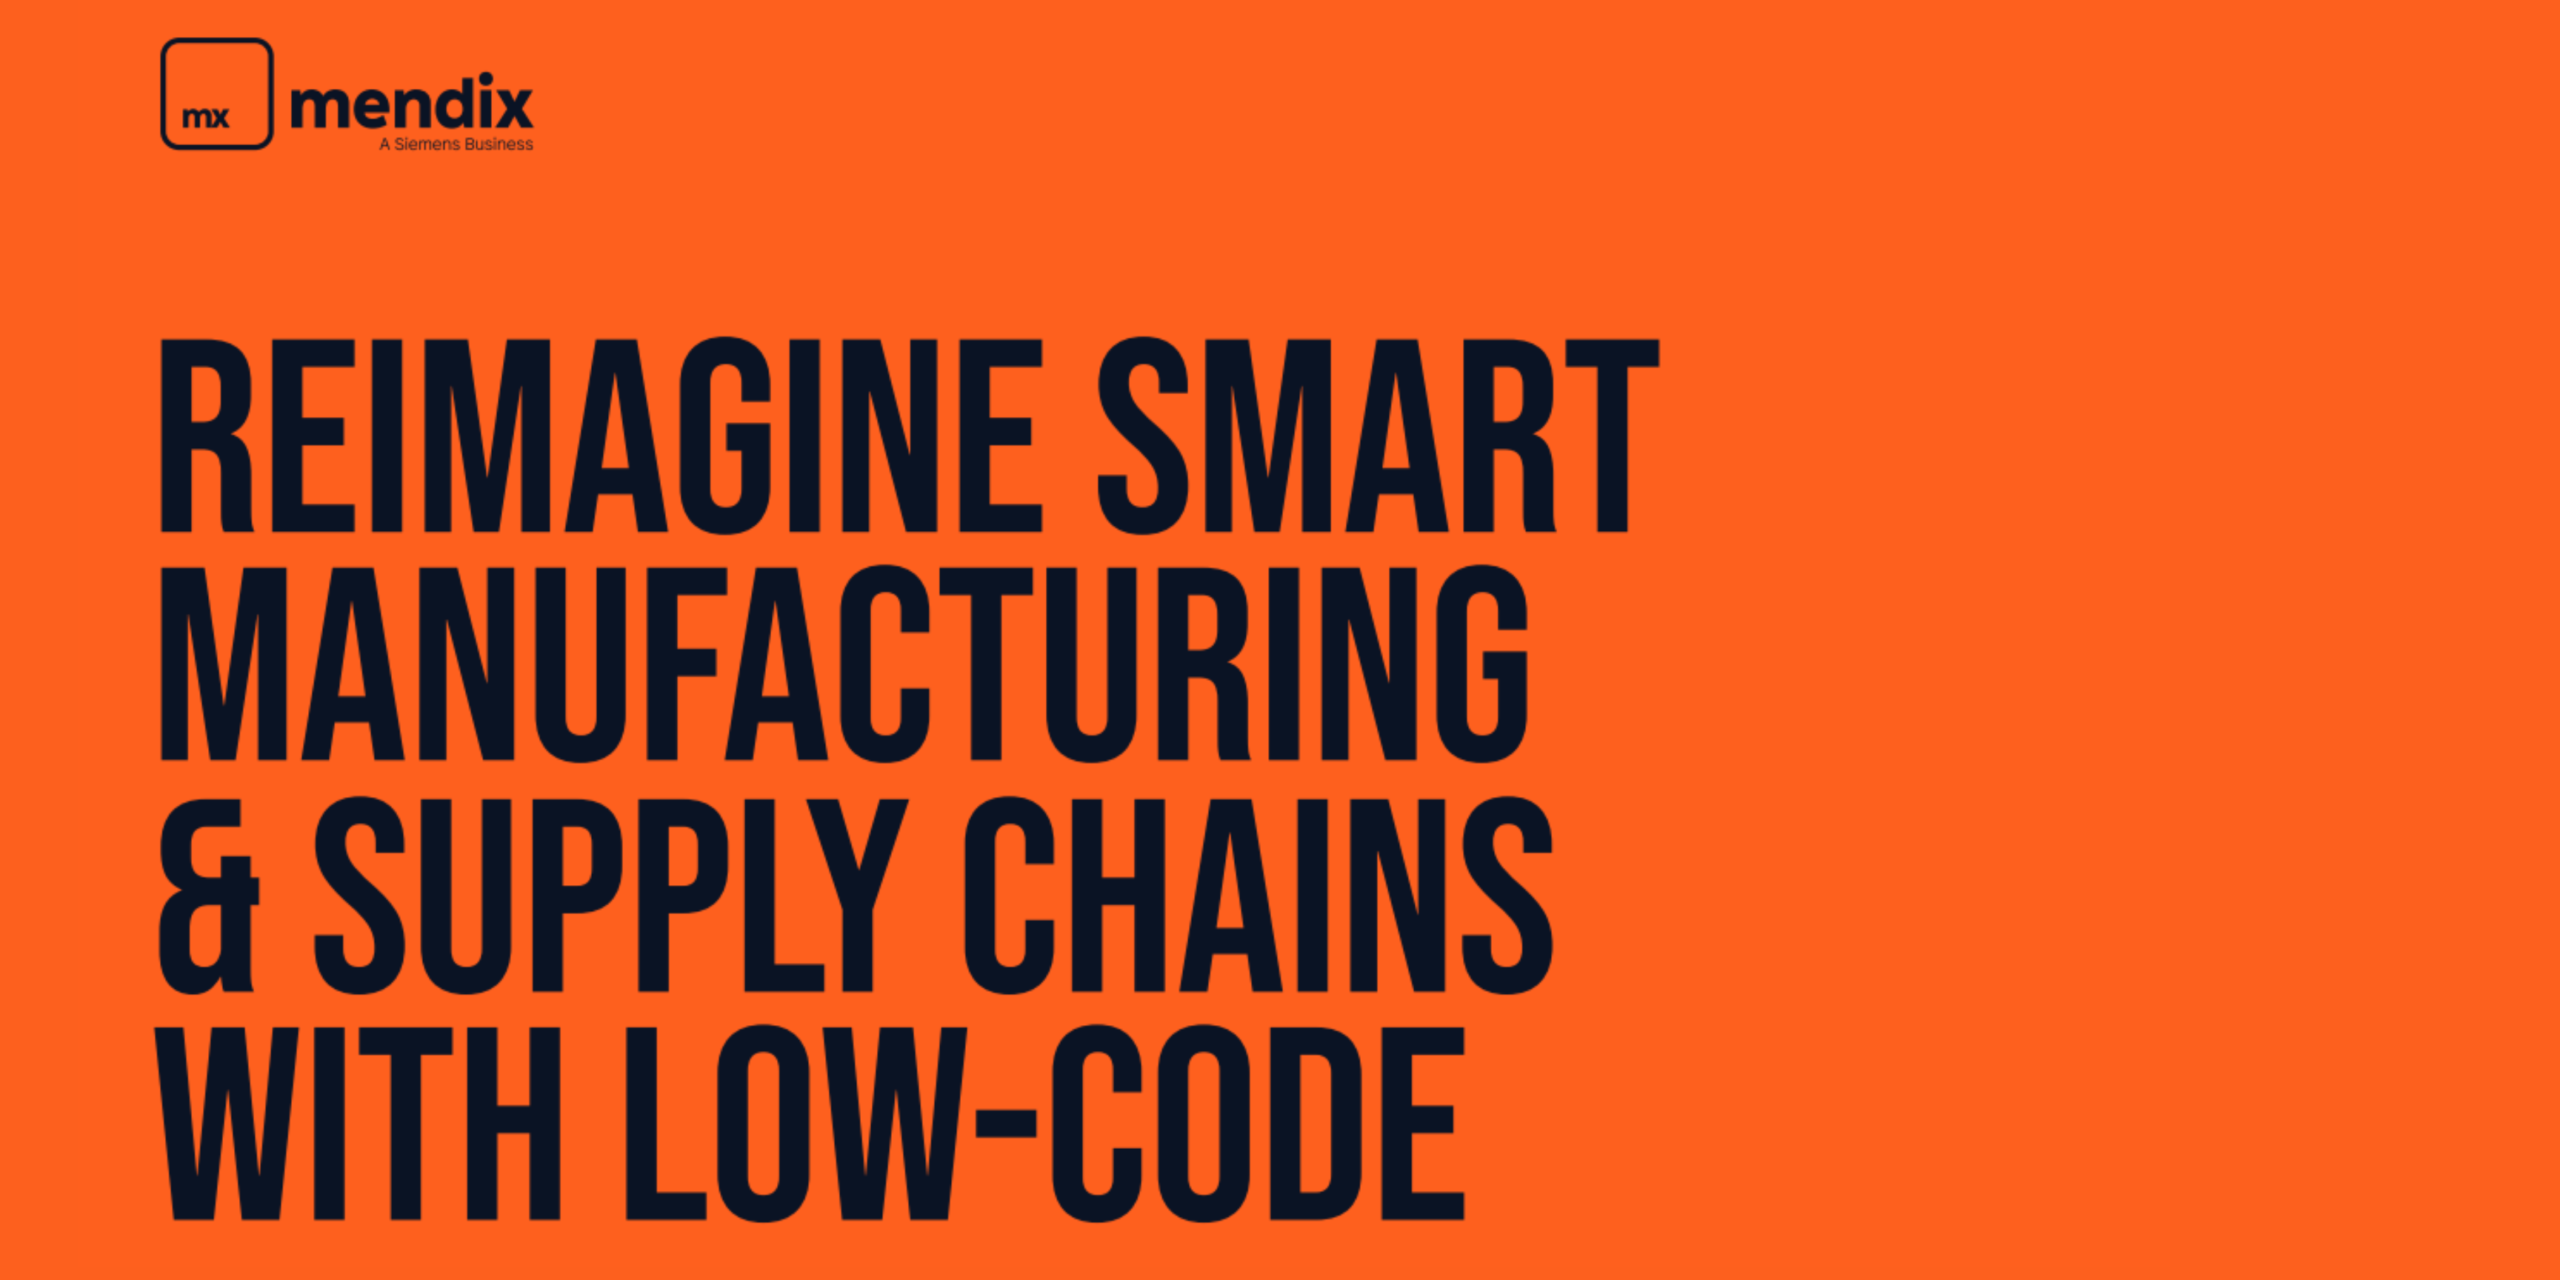 Reimagine Smart Manufacturing and Supply Chain with lowcode 1